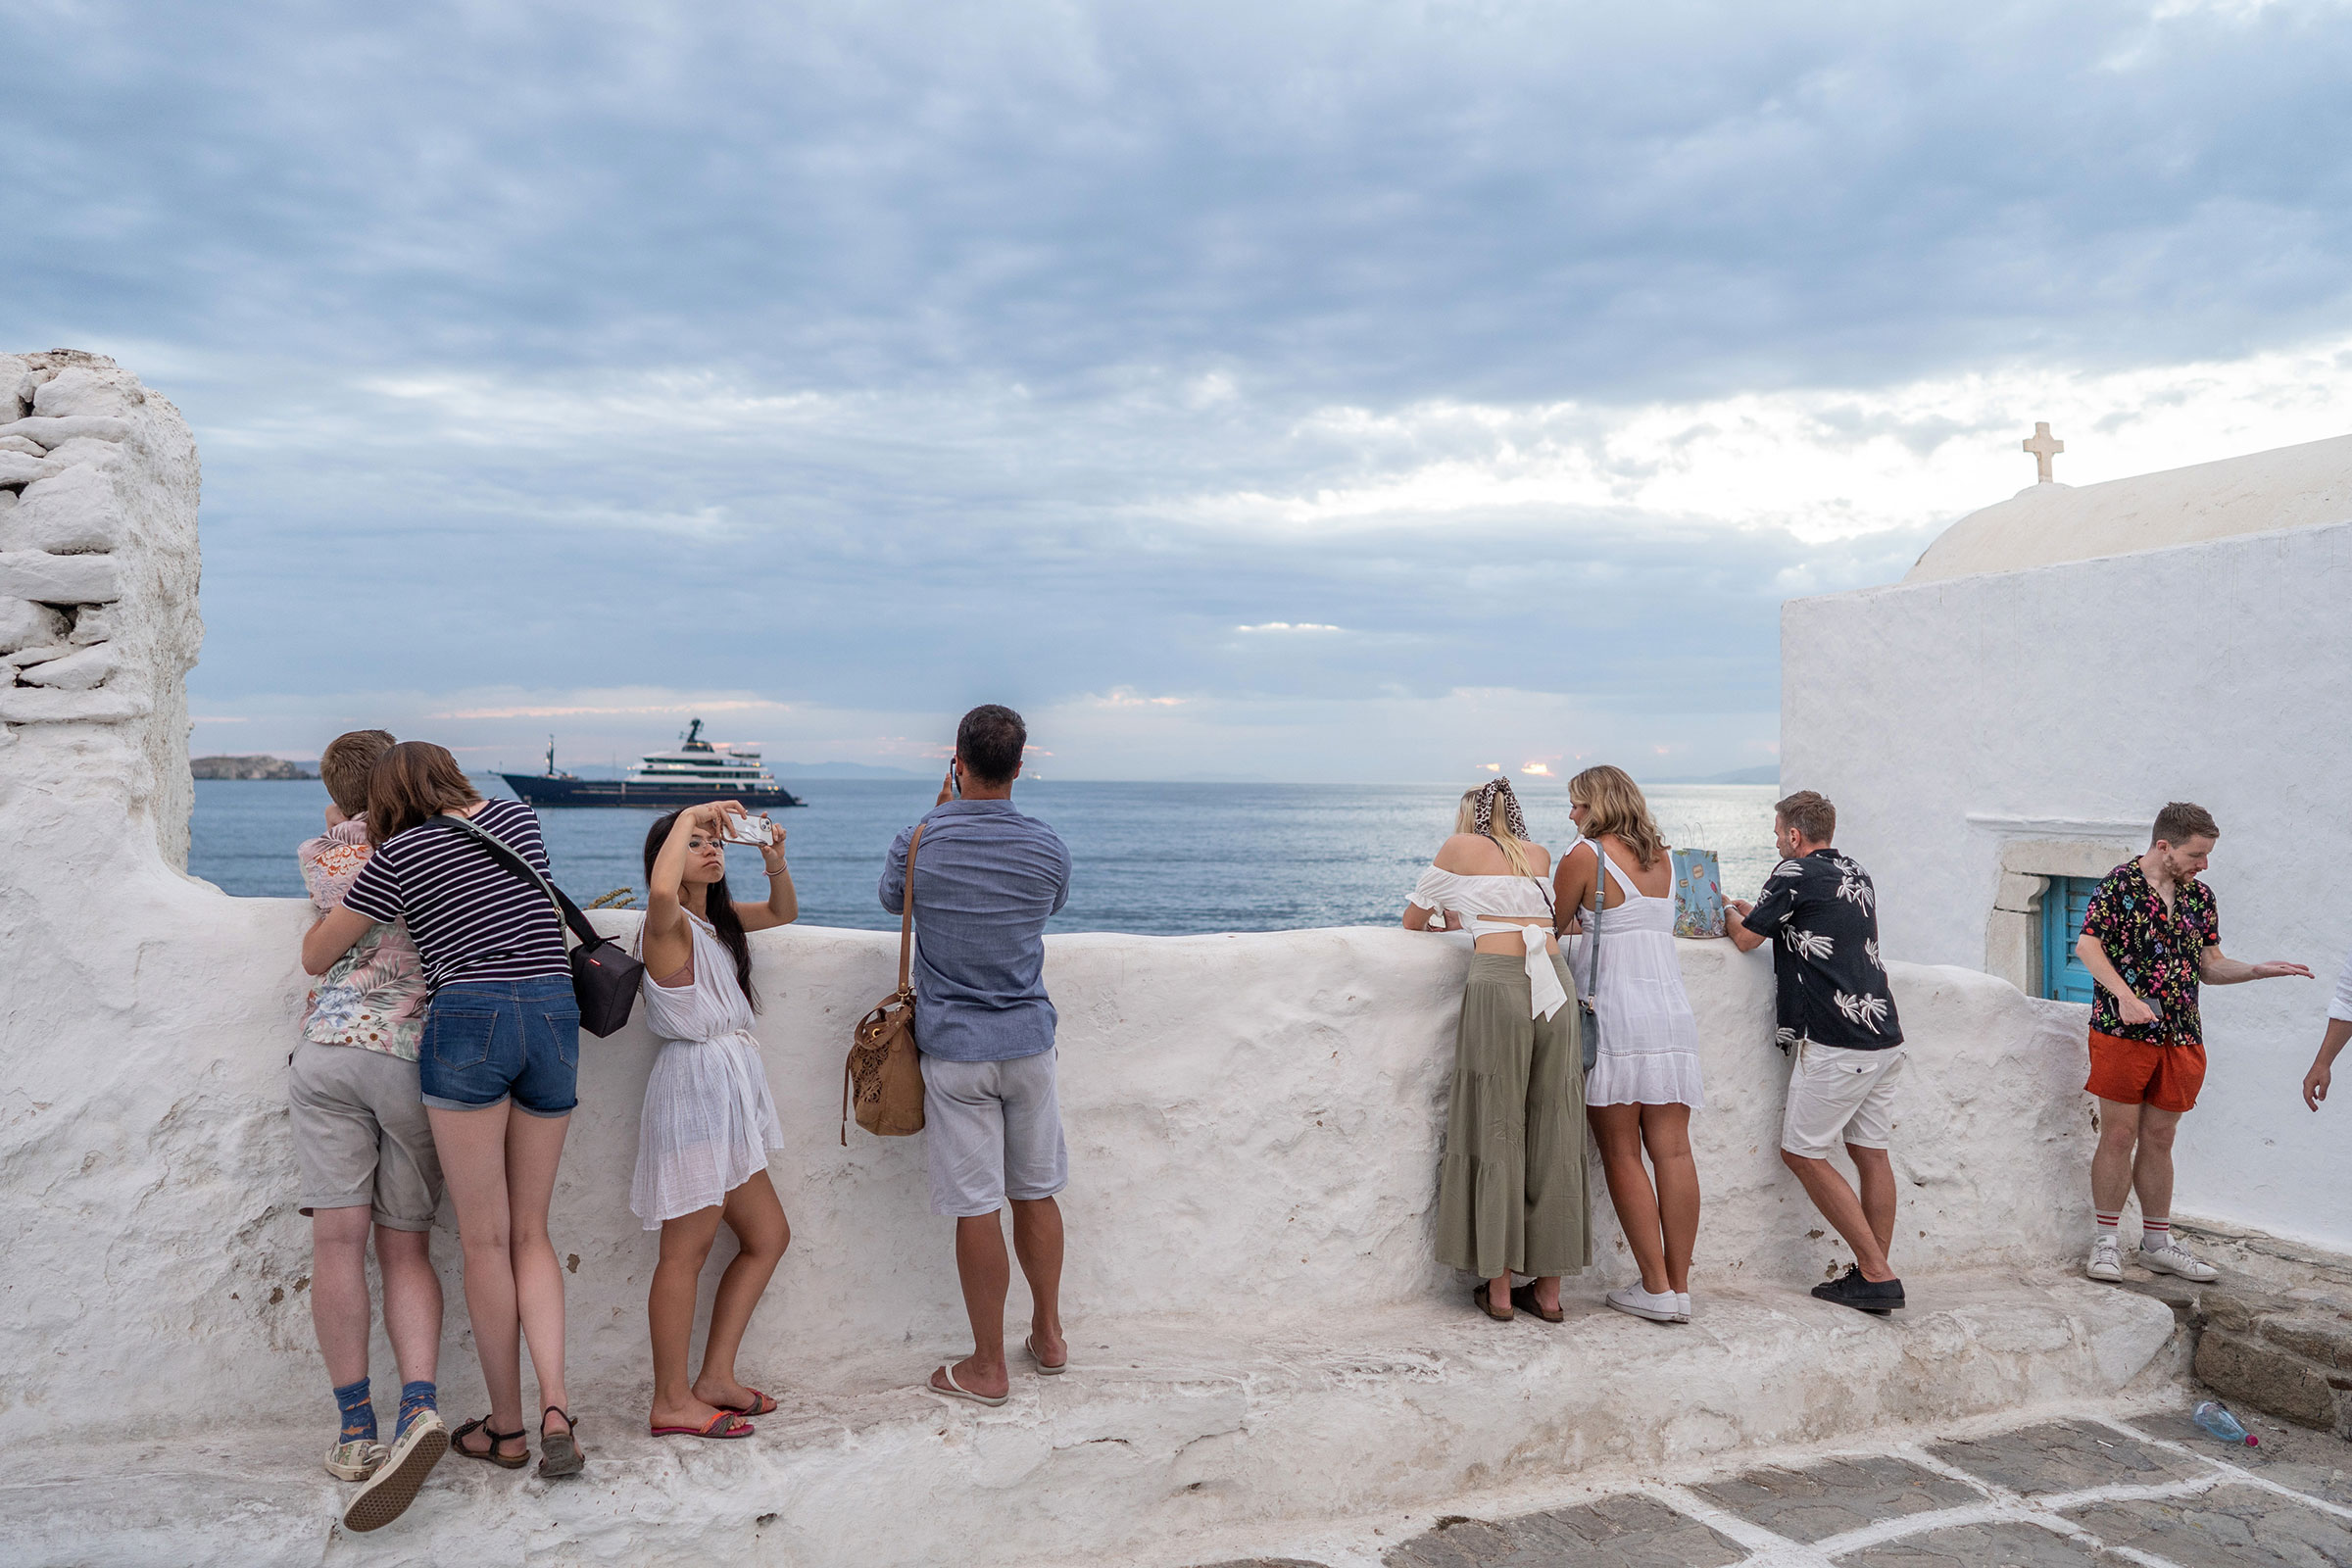 Visitors take photos of the sunset in Chora, Mykonos, Greece, on June 11, 2022. (Nick Paleologos—Bloomberg/Getty Images)